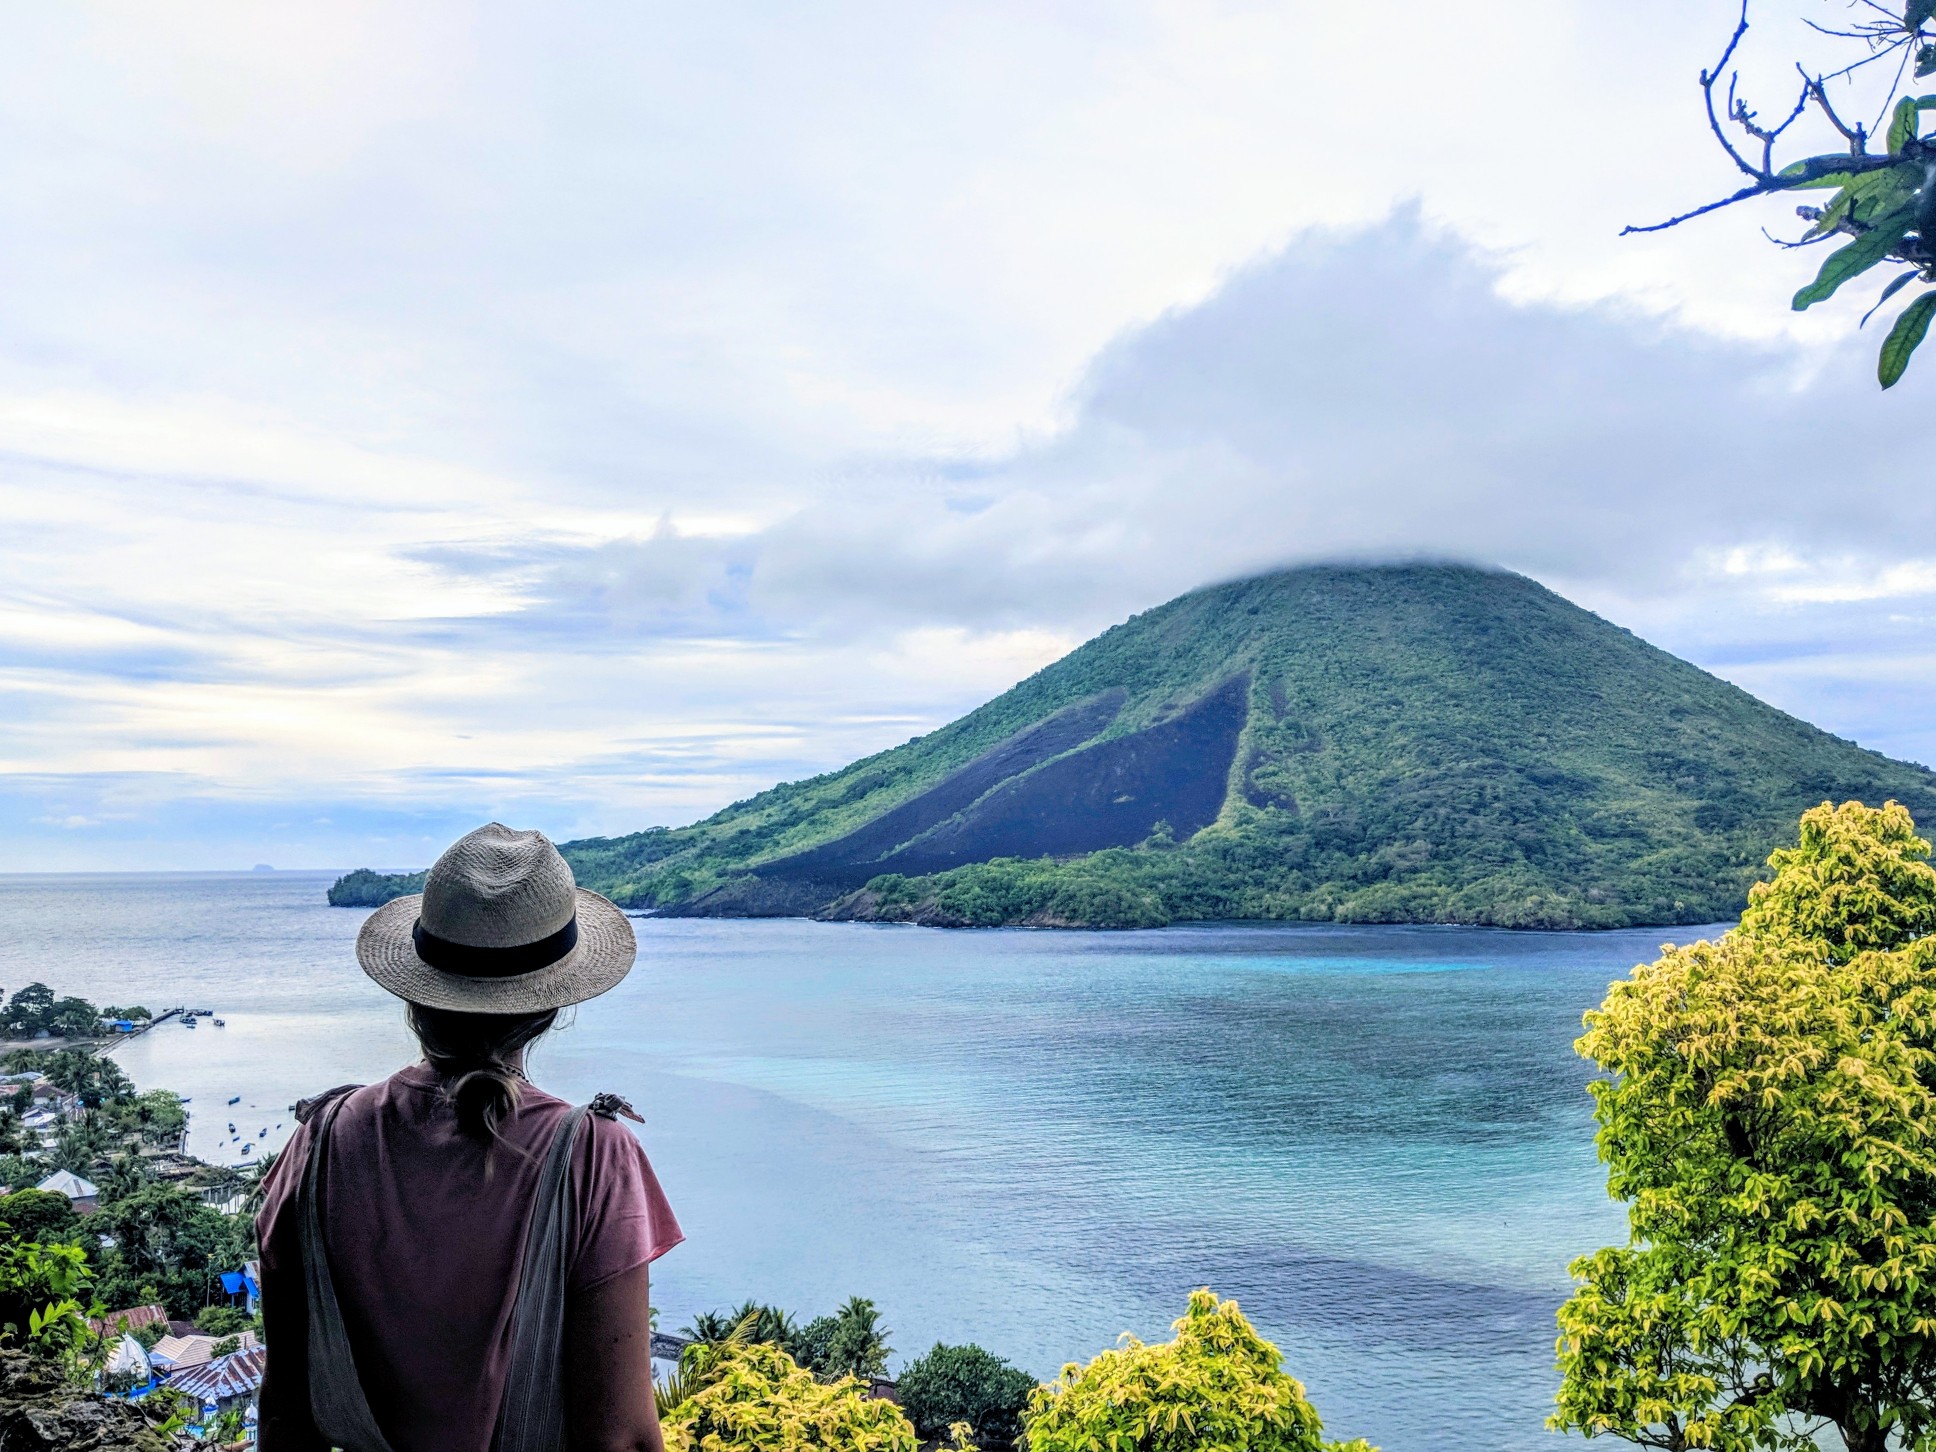 Sarah looking out over the Banda Islands 